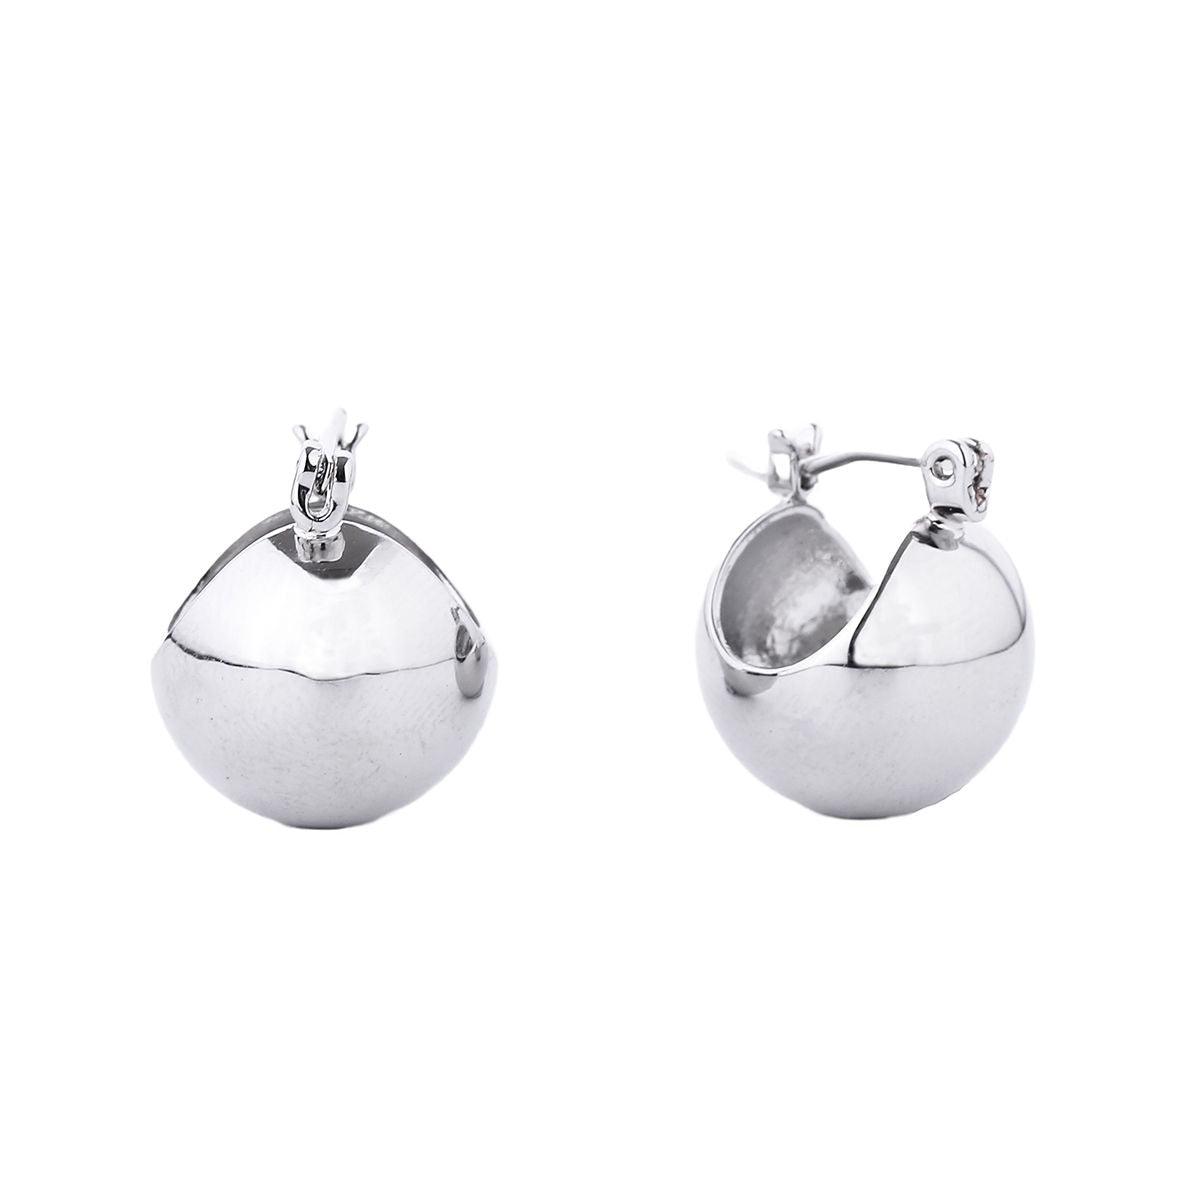 Stand Out in Style: Small White Gold Ball-hoop Earrings